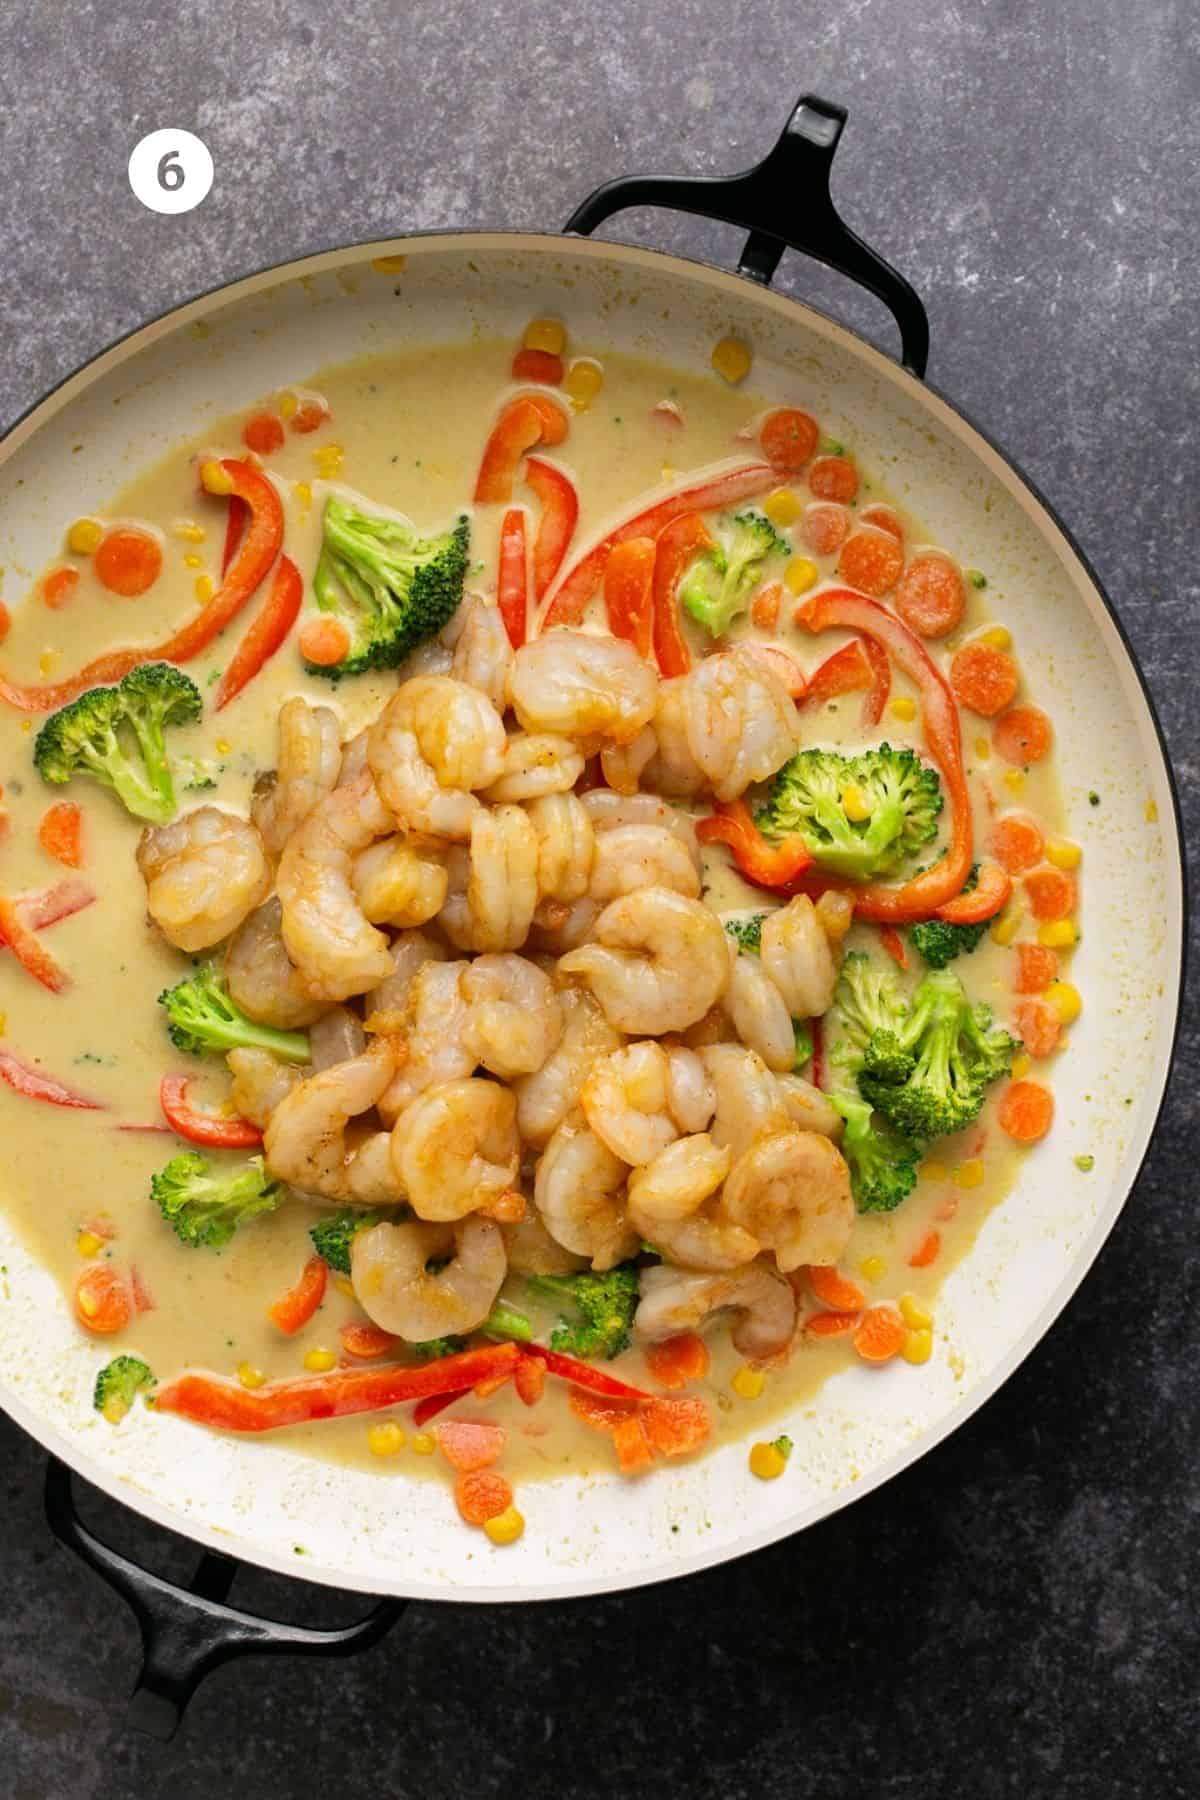 Shrimp added to the pan with vegetables. 